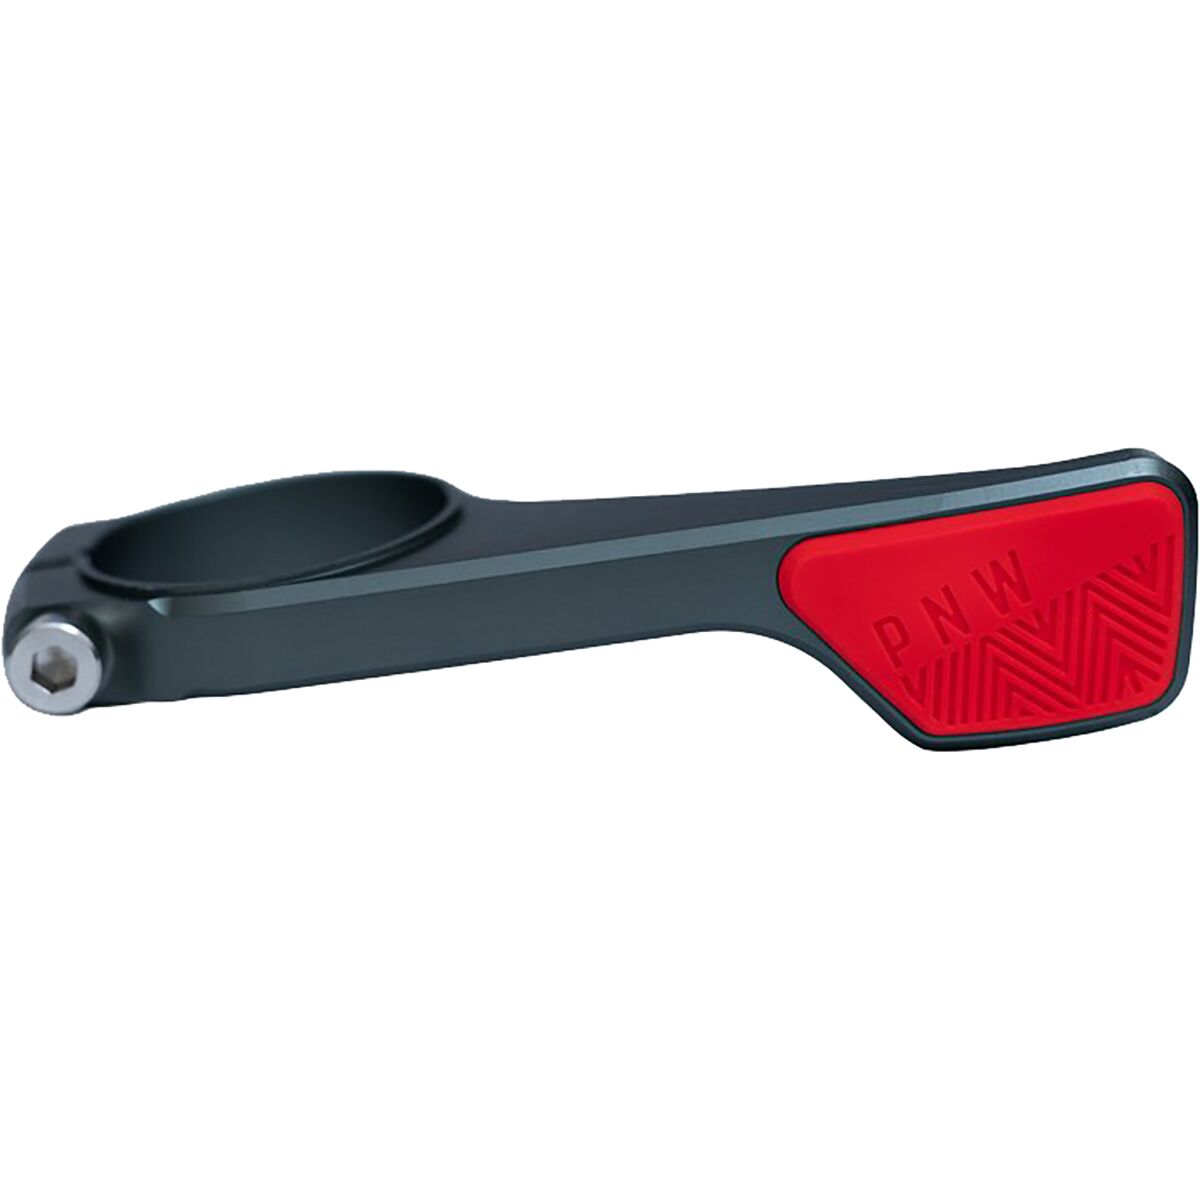 PNW Components Shifty Lever Grey/Red, One Size